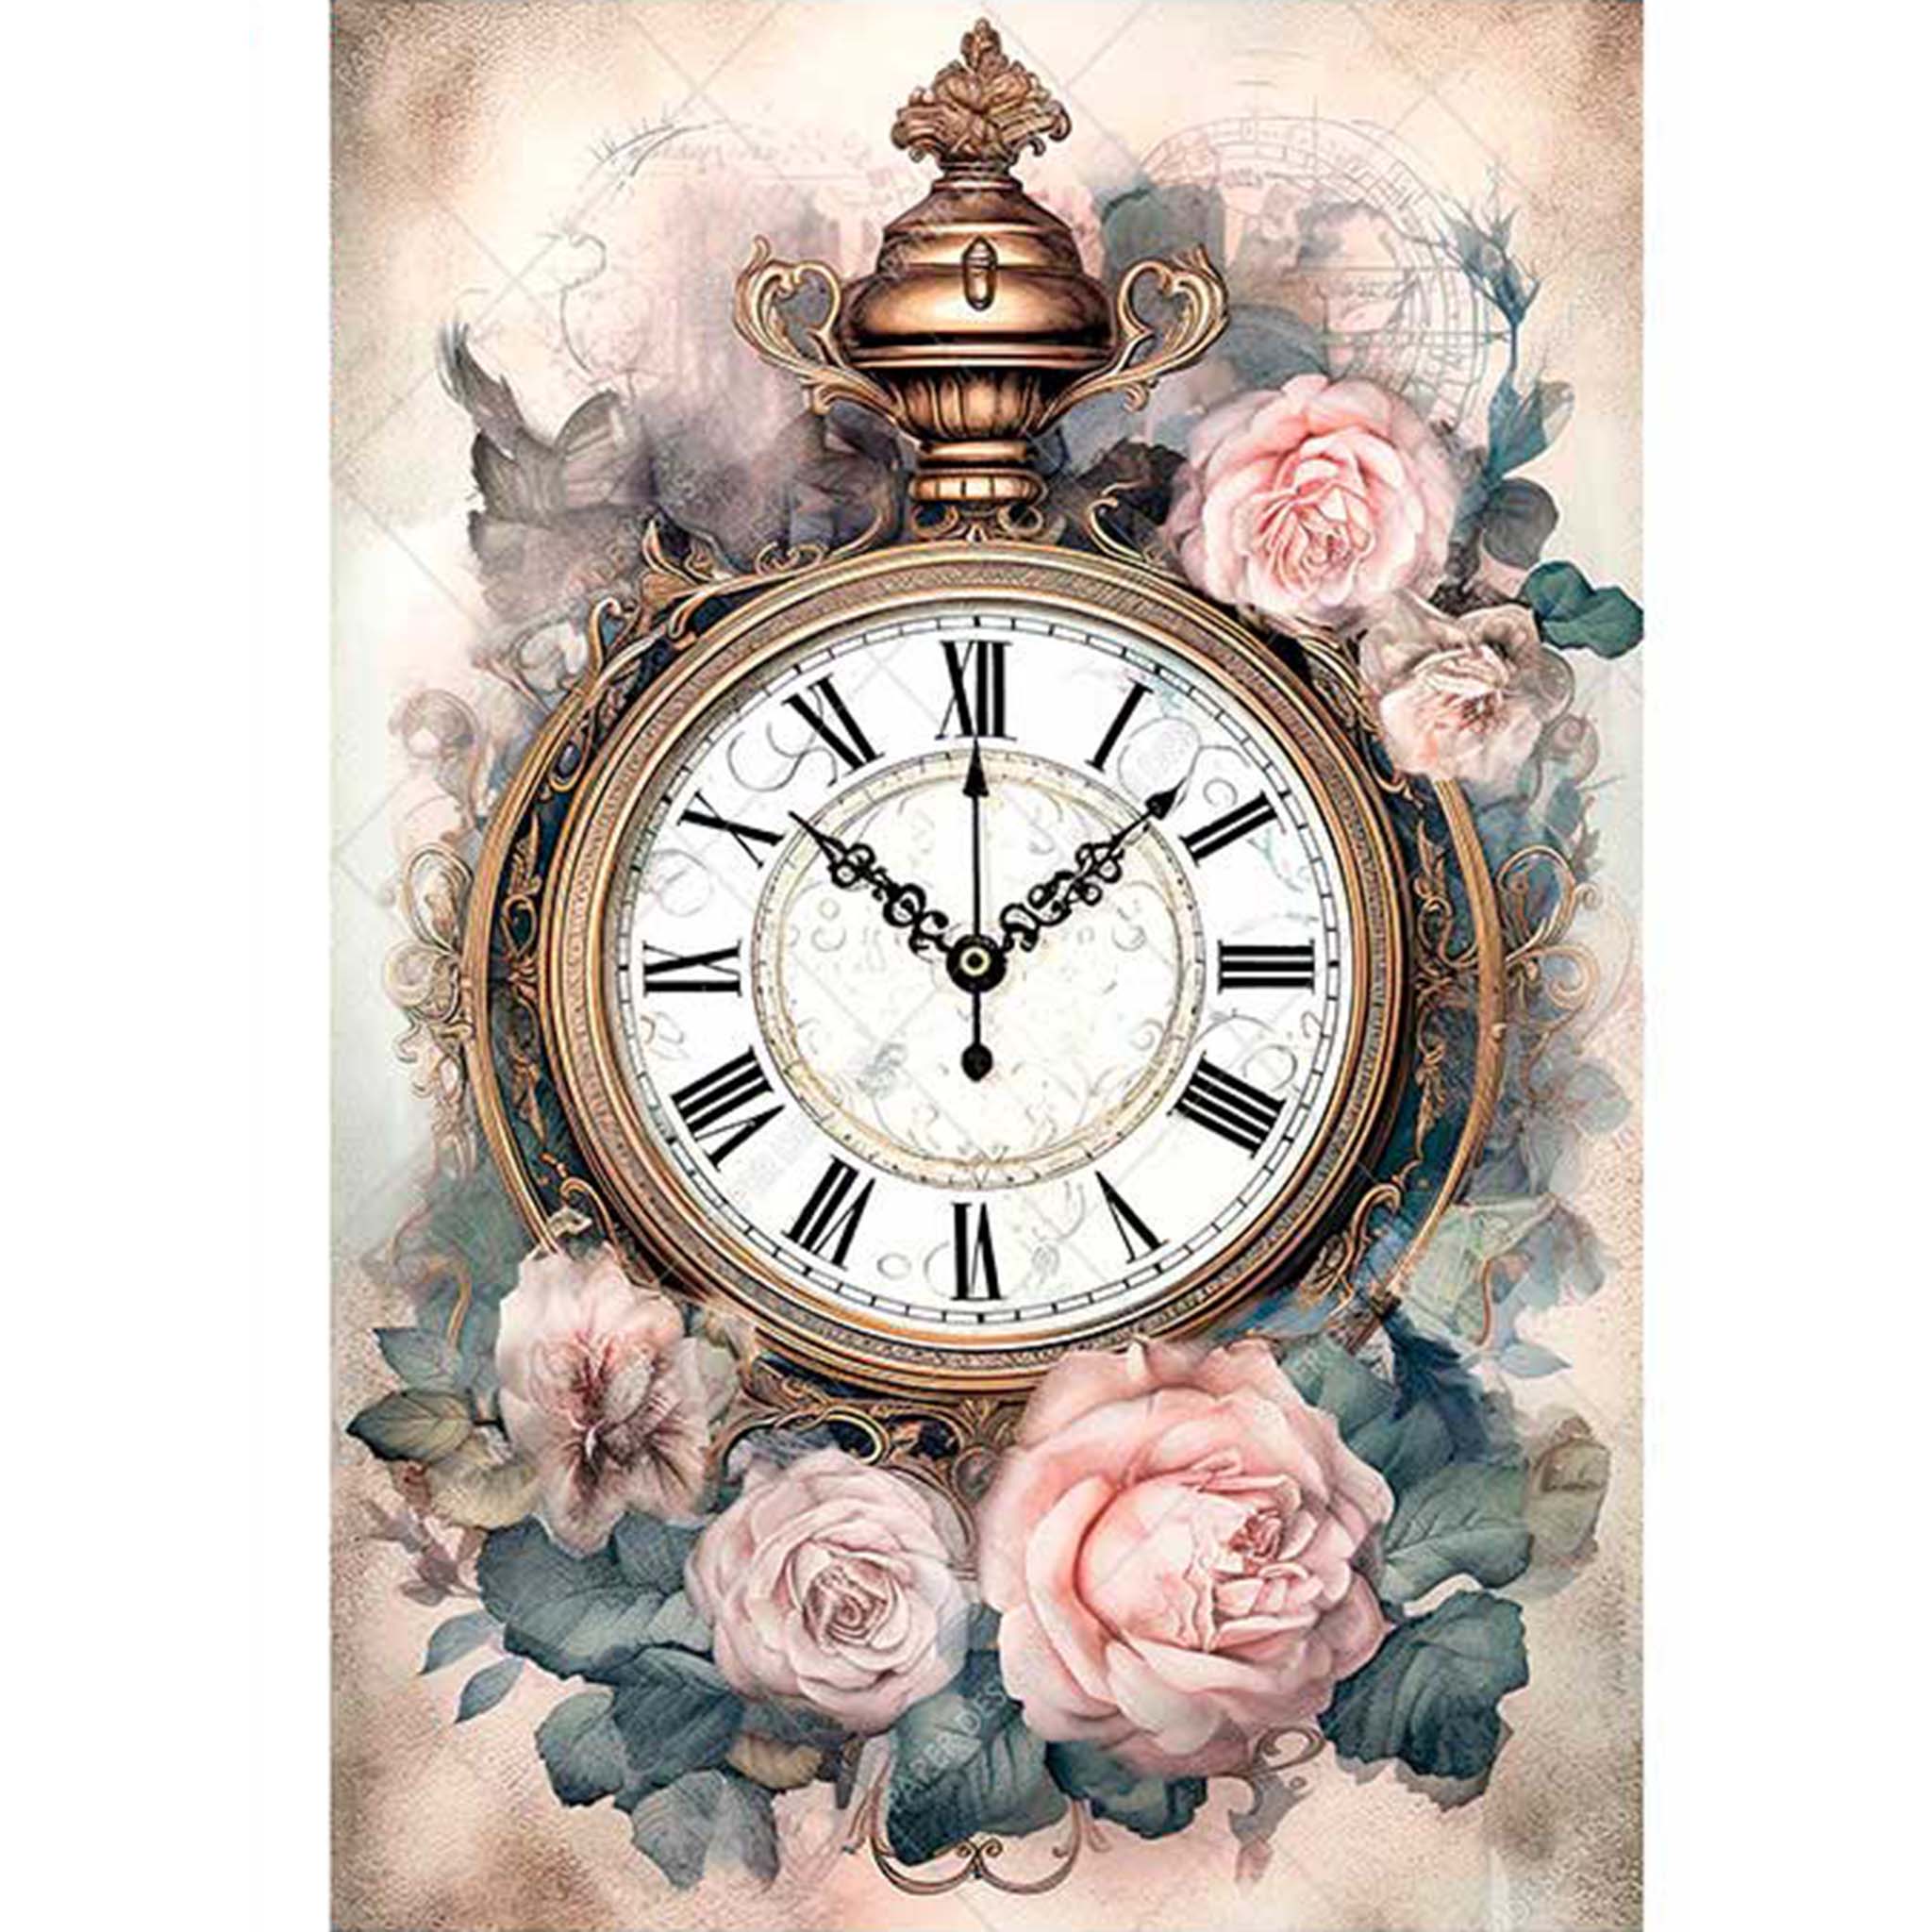 A3 rice paper design that features a classic pocket watch surrounded by elegant pink roses. White borders are on the sides.